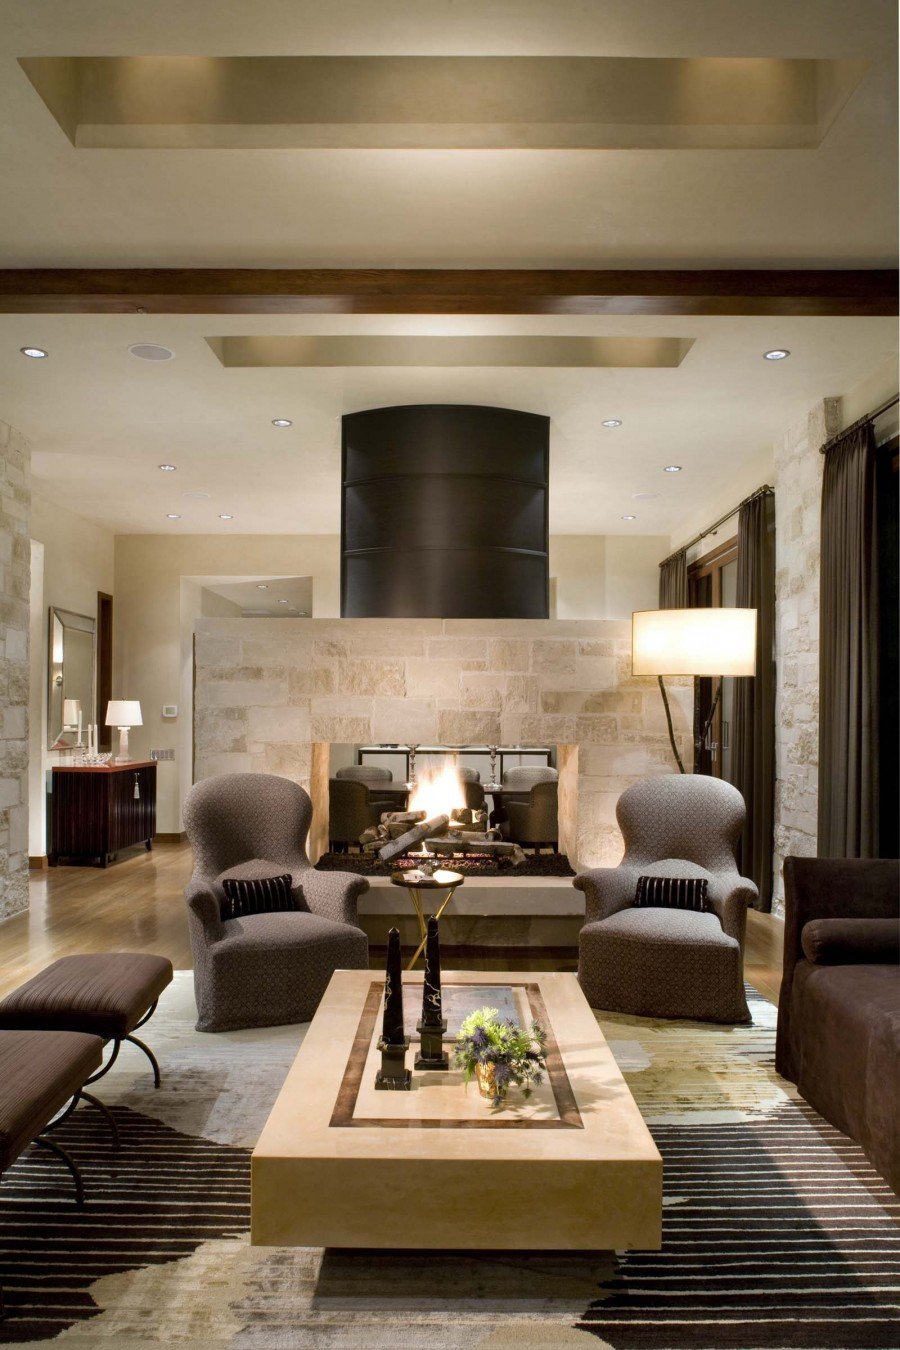 Ranch House Living Room Decorating Ideas 16 Fabulous Earth tones Living Room Designs Decoholic